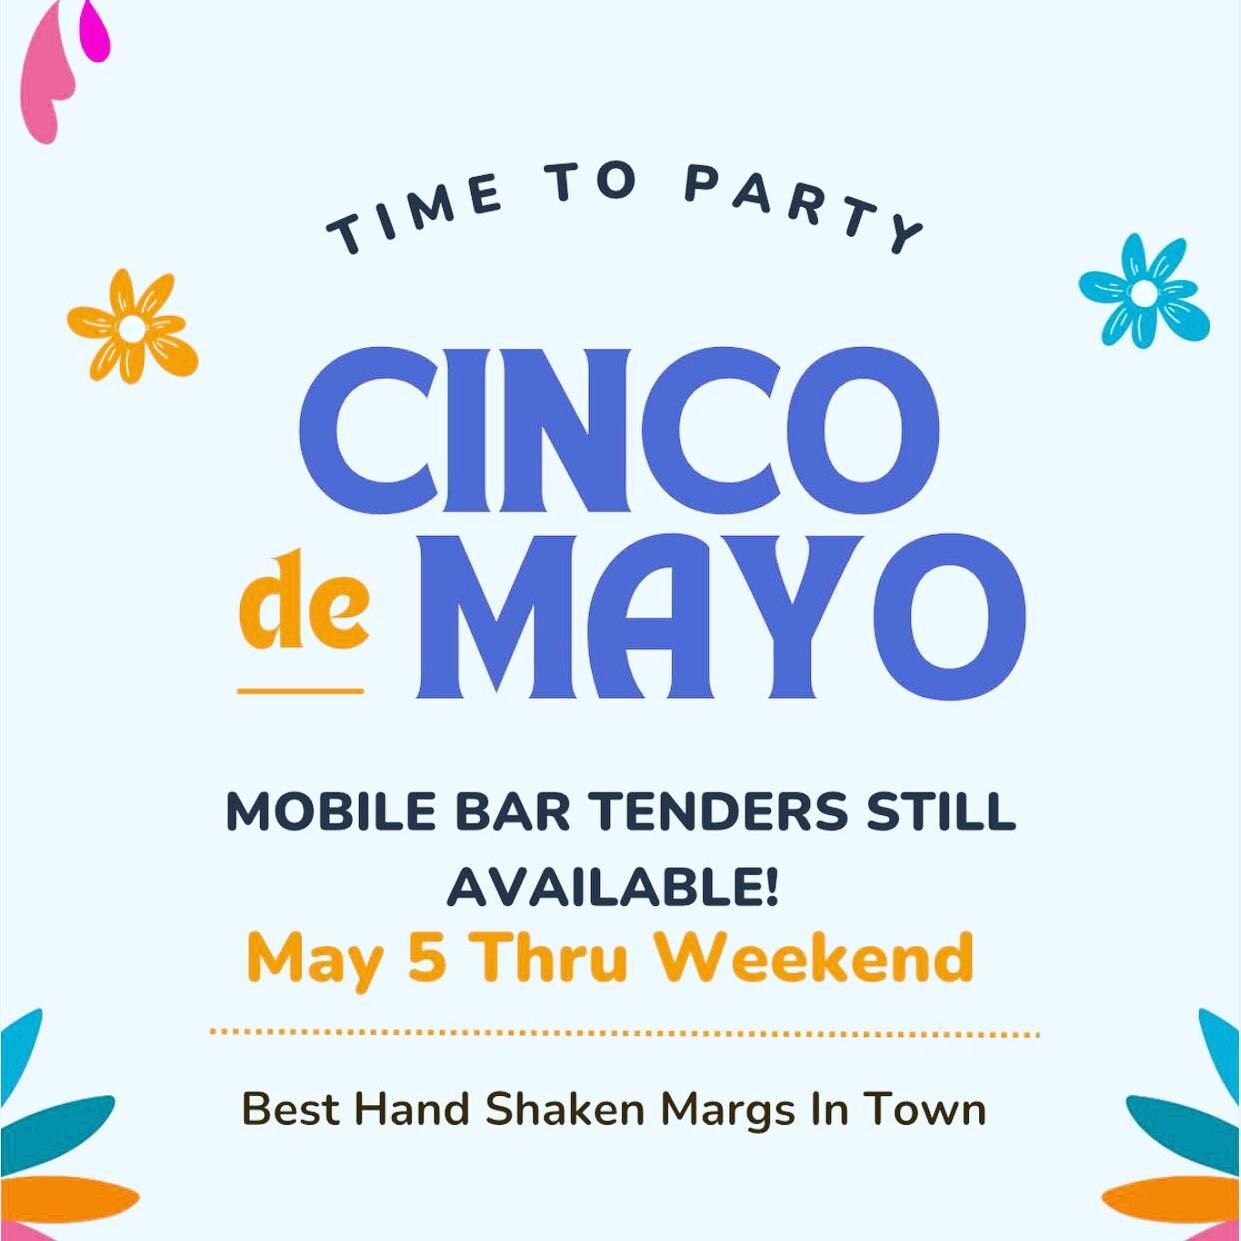 Let The Yard Bar do the work for your party! We have an array of amazing hand shaken cocktails to quench your Cinco de Mayo thirst. 🥵 🍹 🌮 🍺 🍷 🇲🇽 #scottsdale #cincodemayo #yourdomestique #arcadianews  #blanco #arizonamobilebar #azmobilebartende